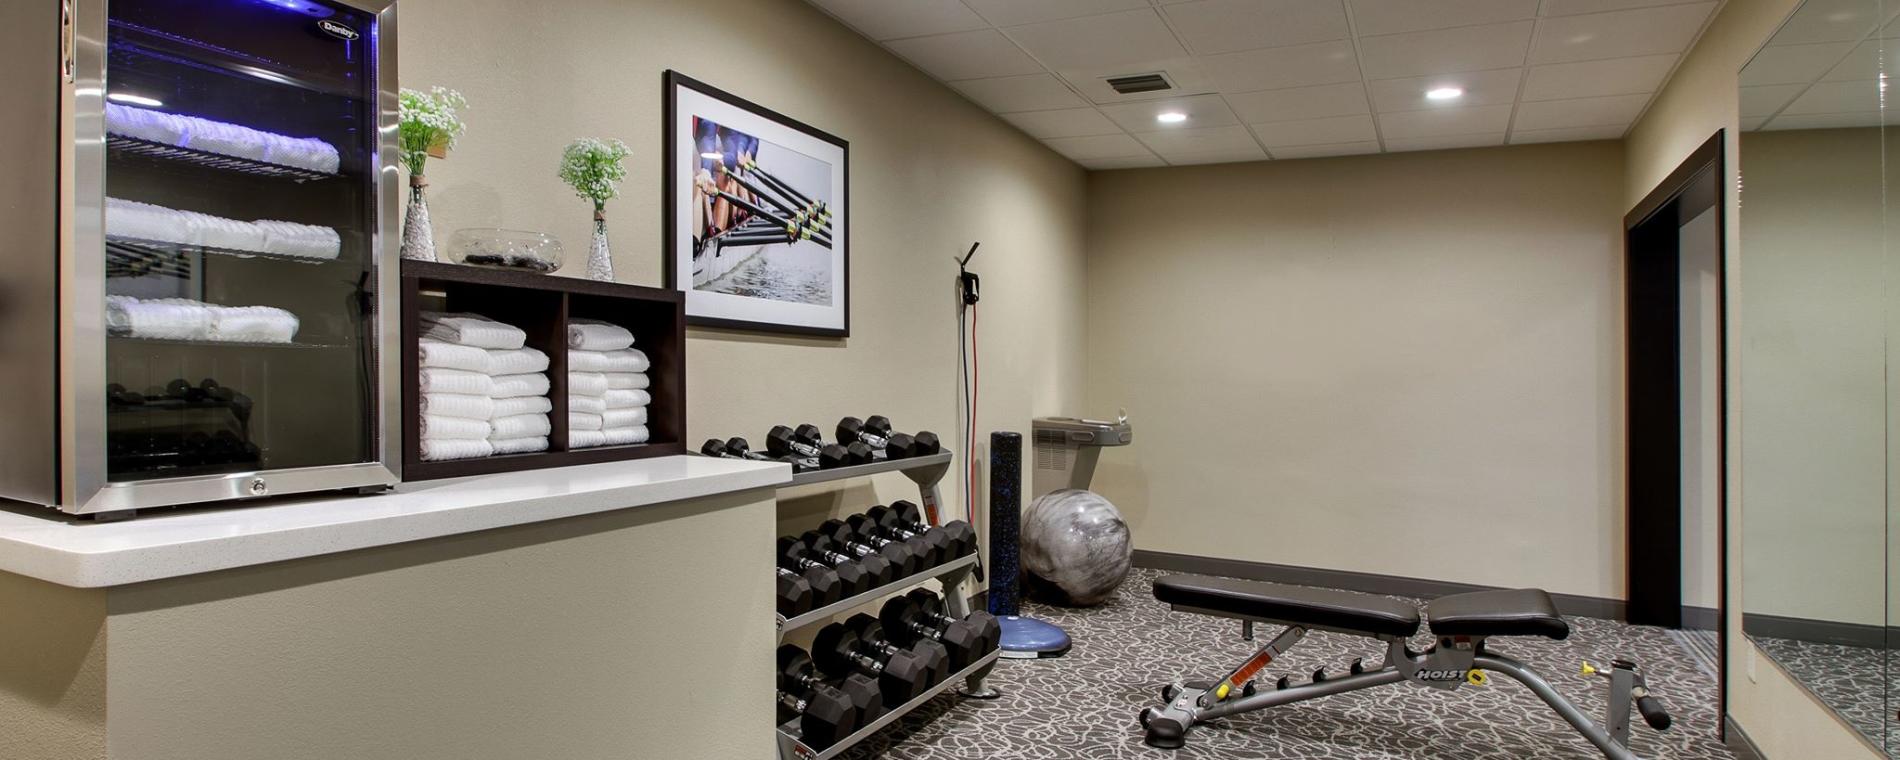 Candlewood Suites Wichita East Fitness Center/Yoga room